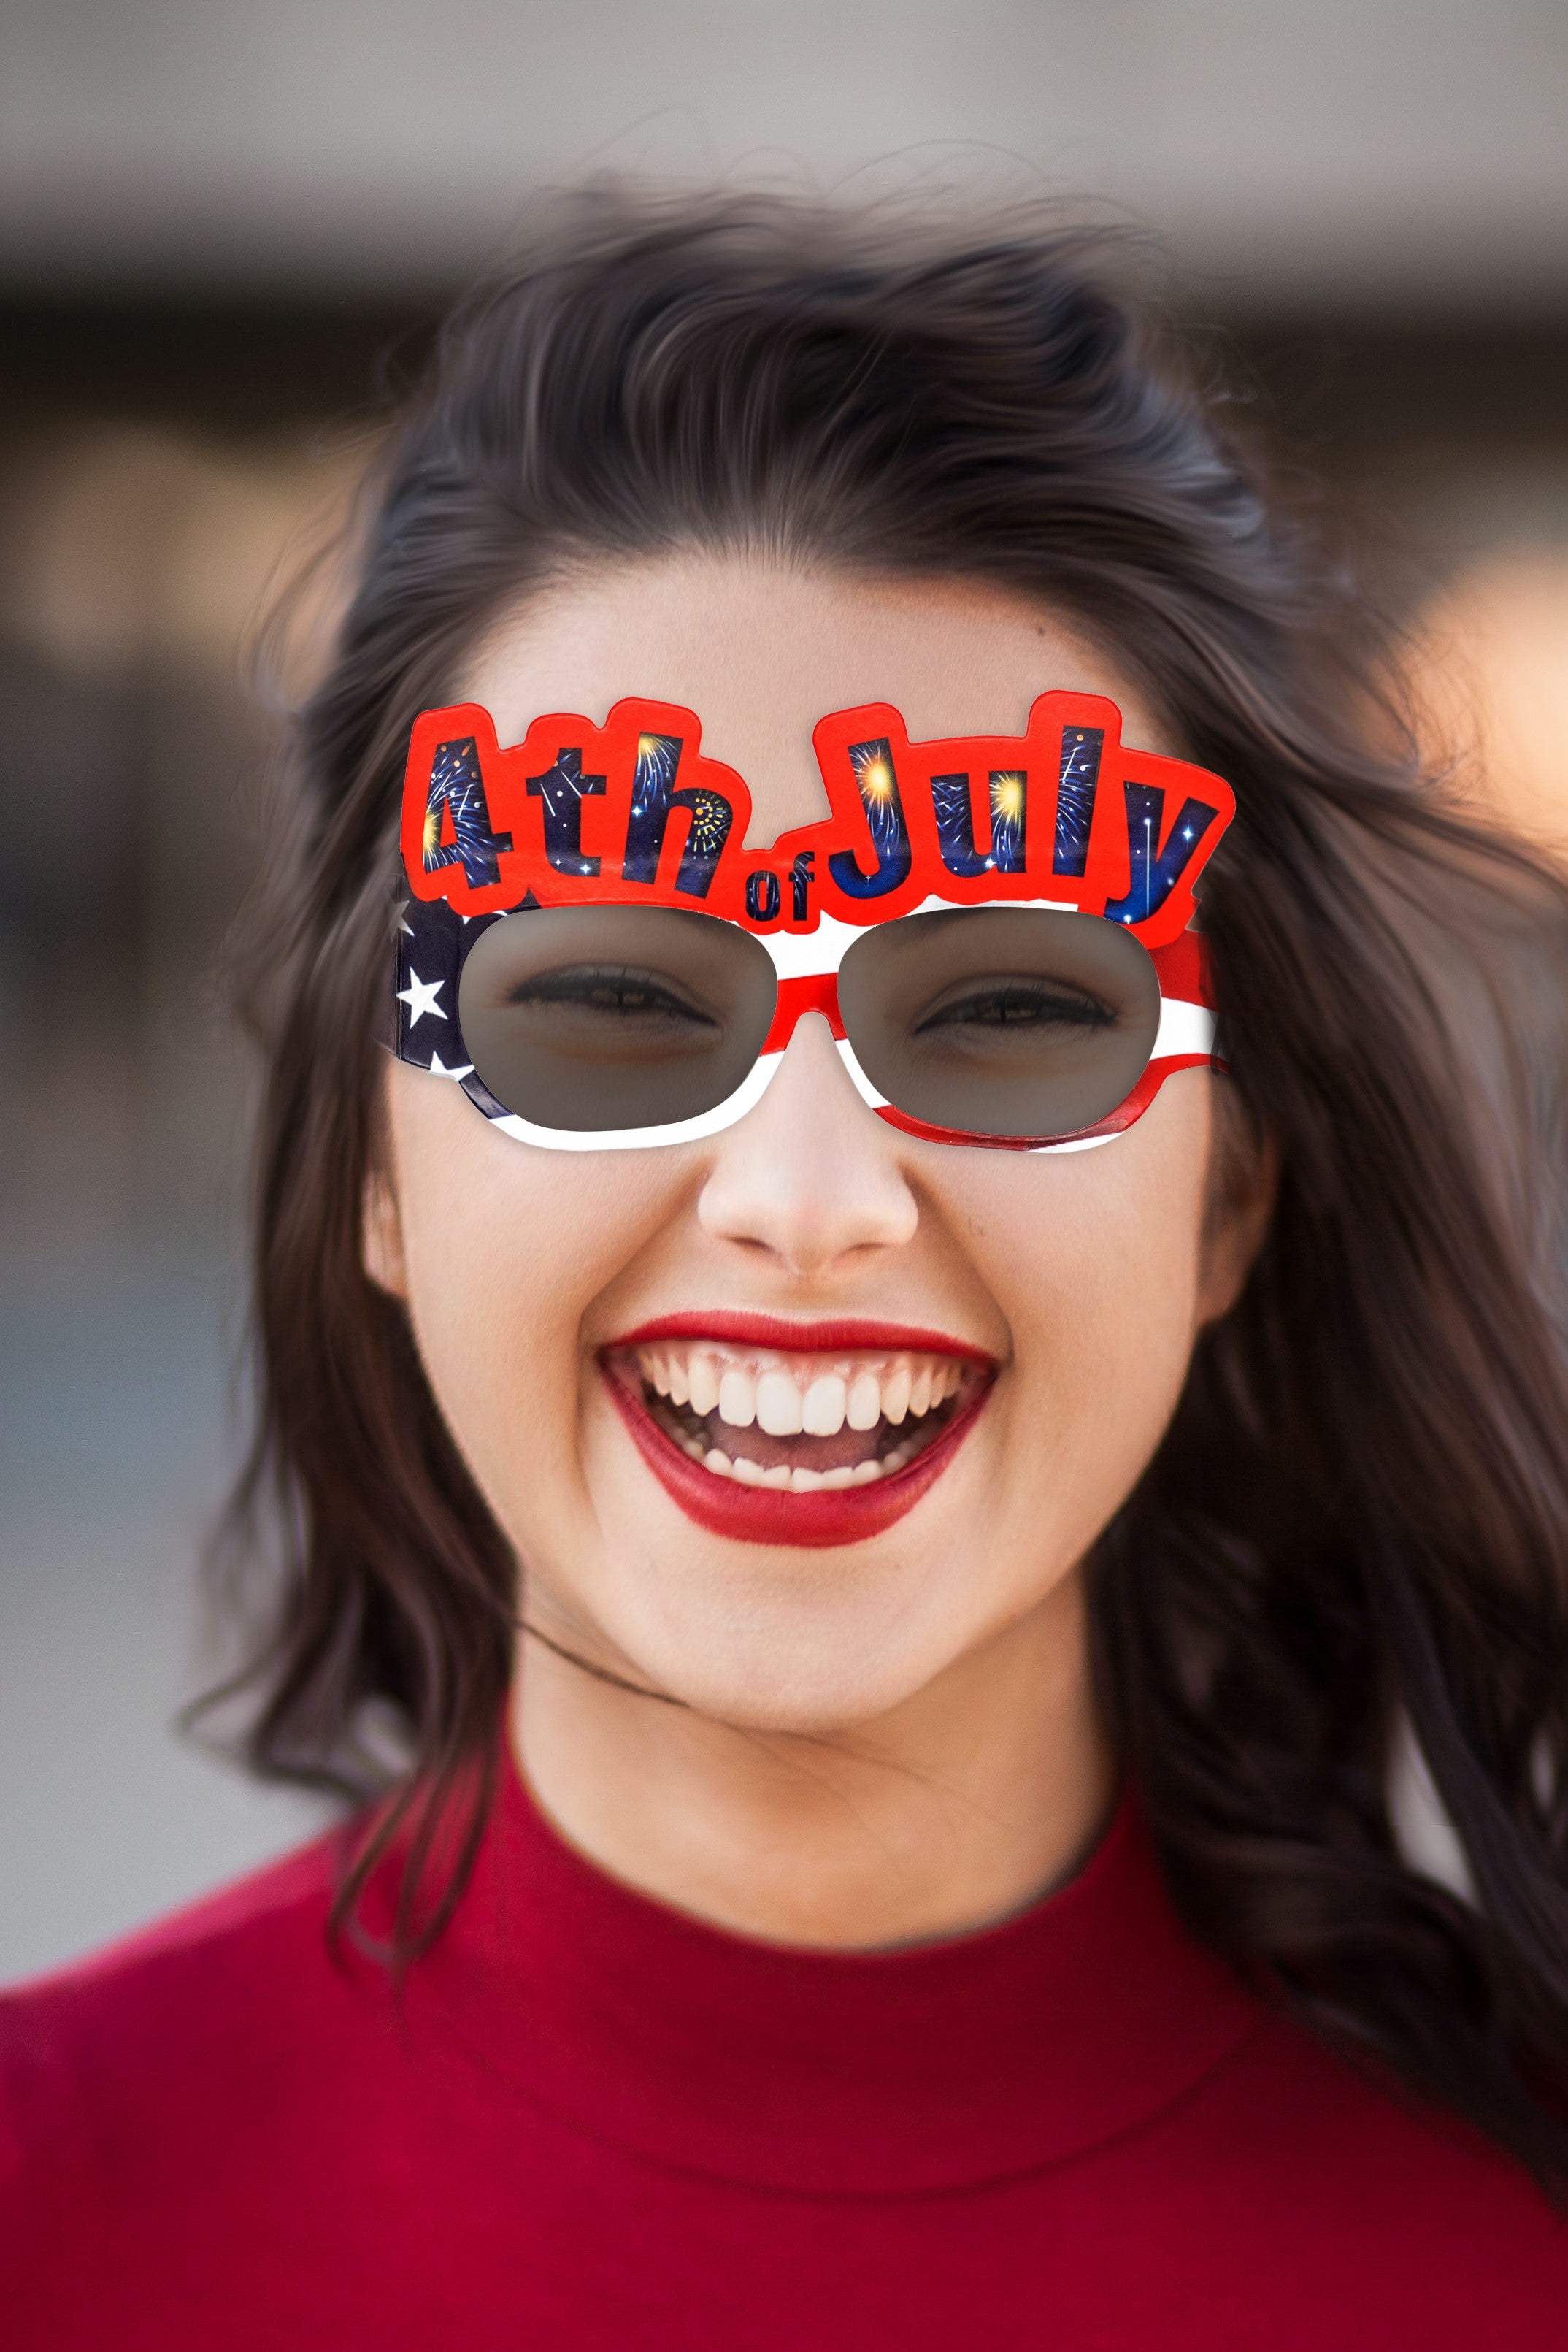 Independence Day sunglasses